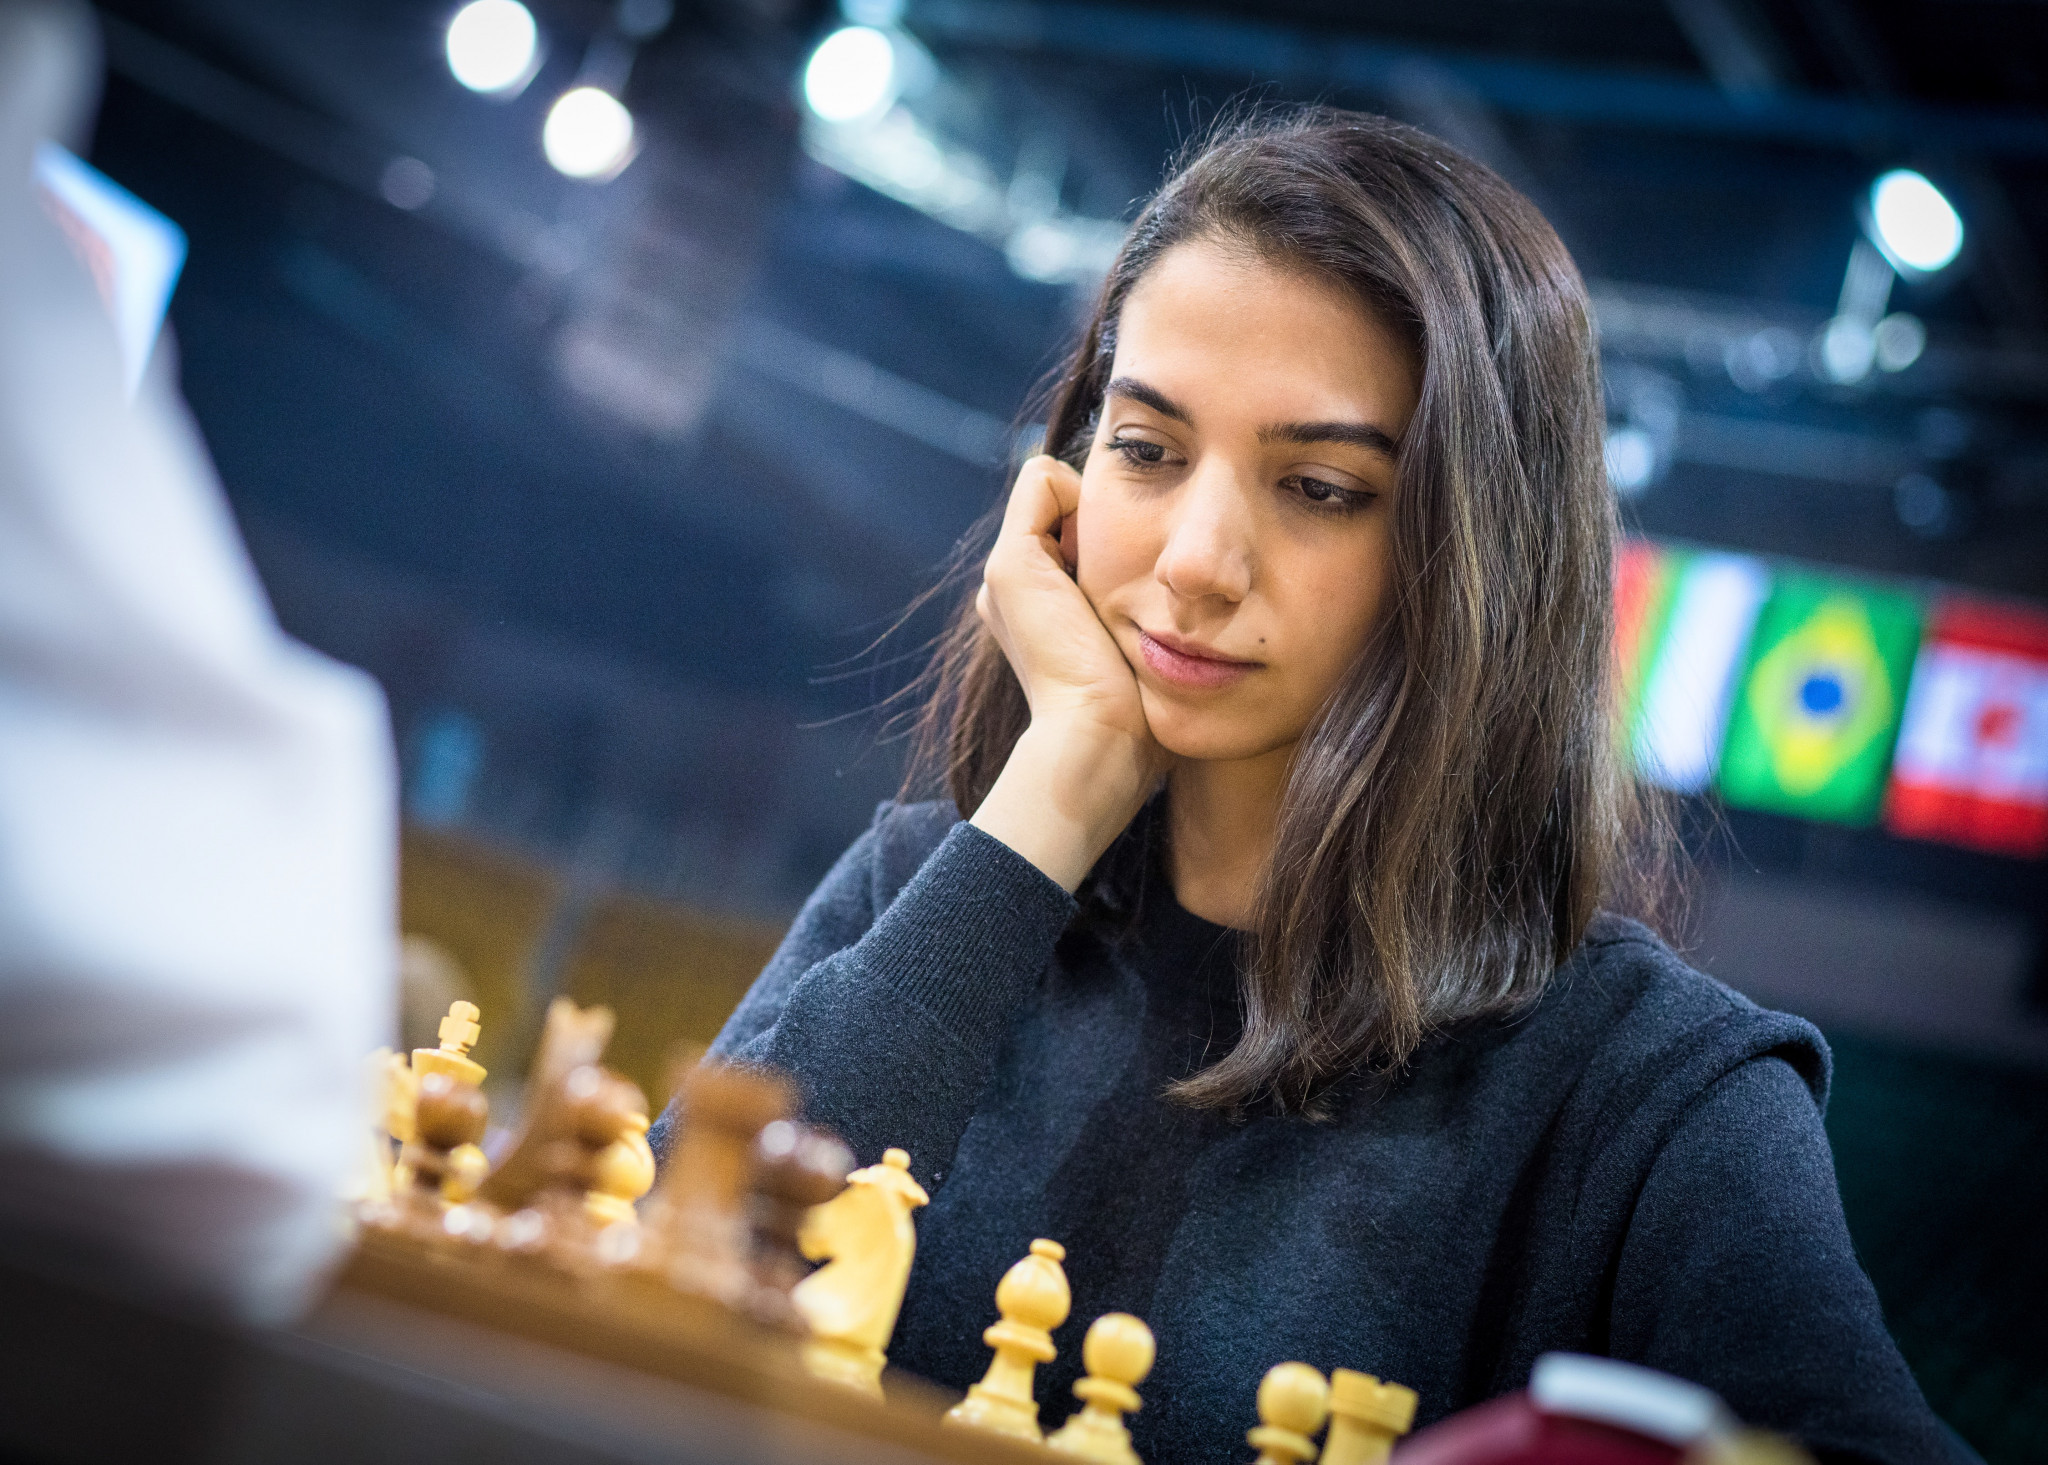 Sara Khadem was pictured not wearing a hijab at the FIDE World Rapid and Blitz Chess Championships, sparking fears over her safety ©Lennart Ootes/FIDE